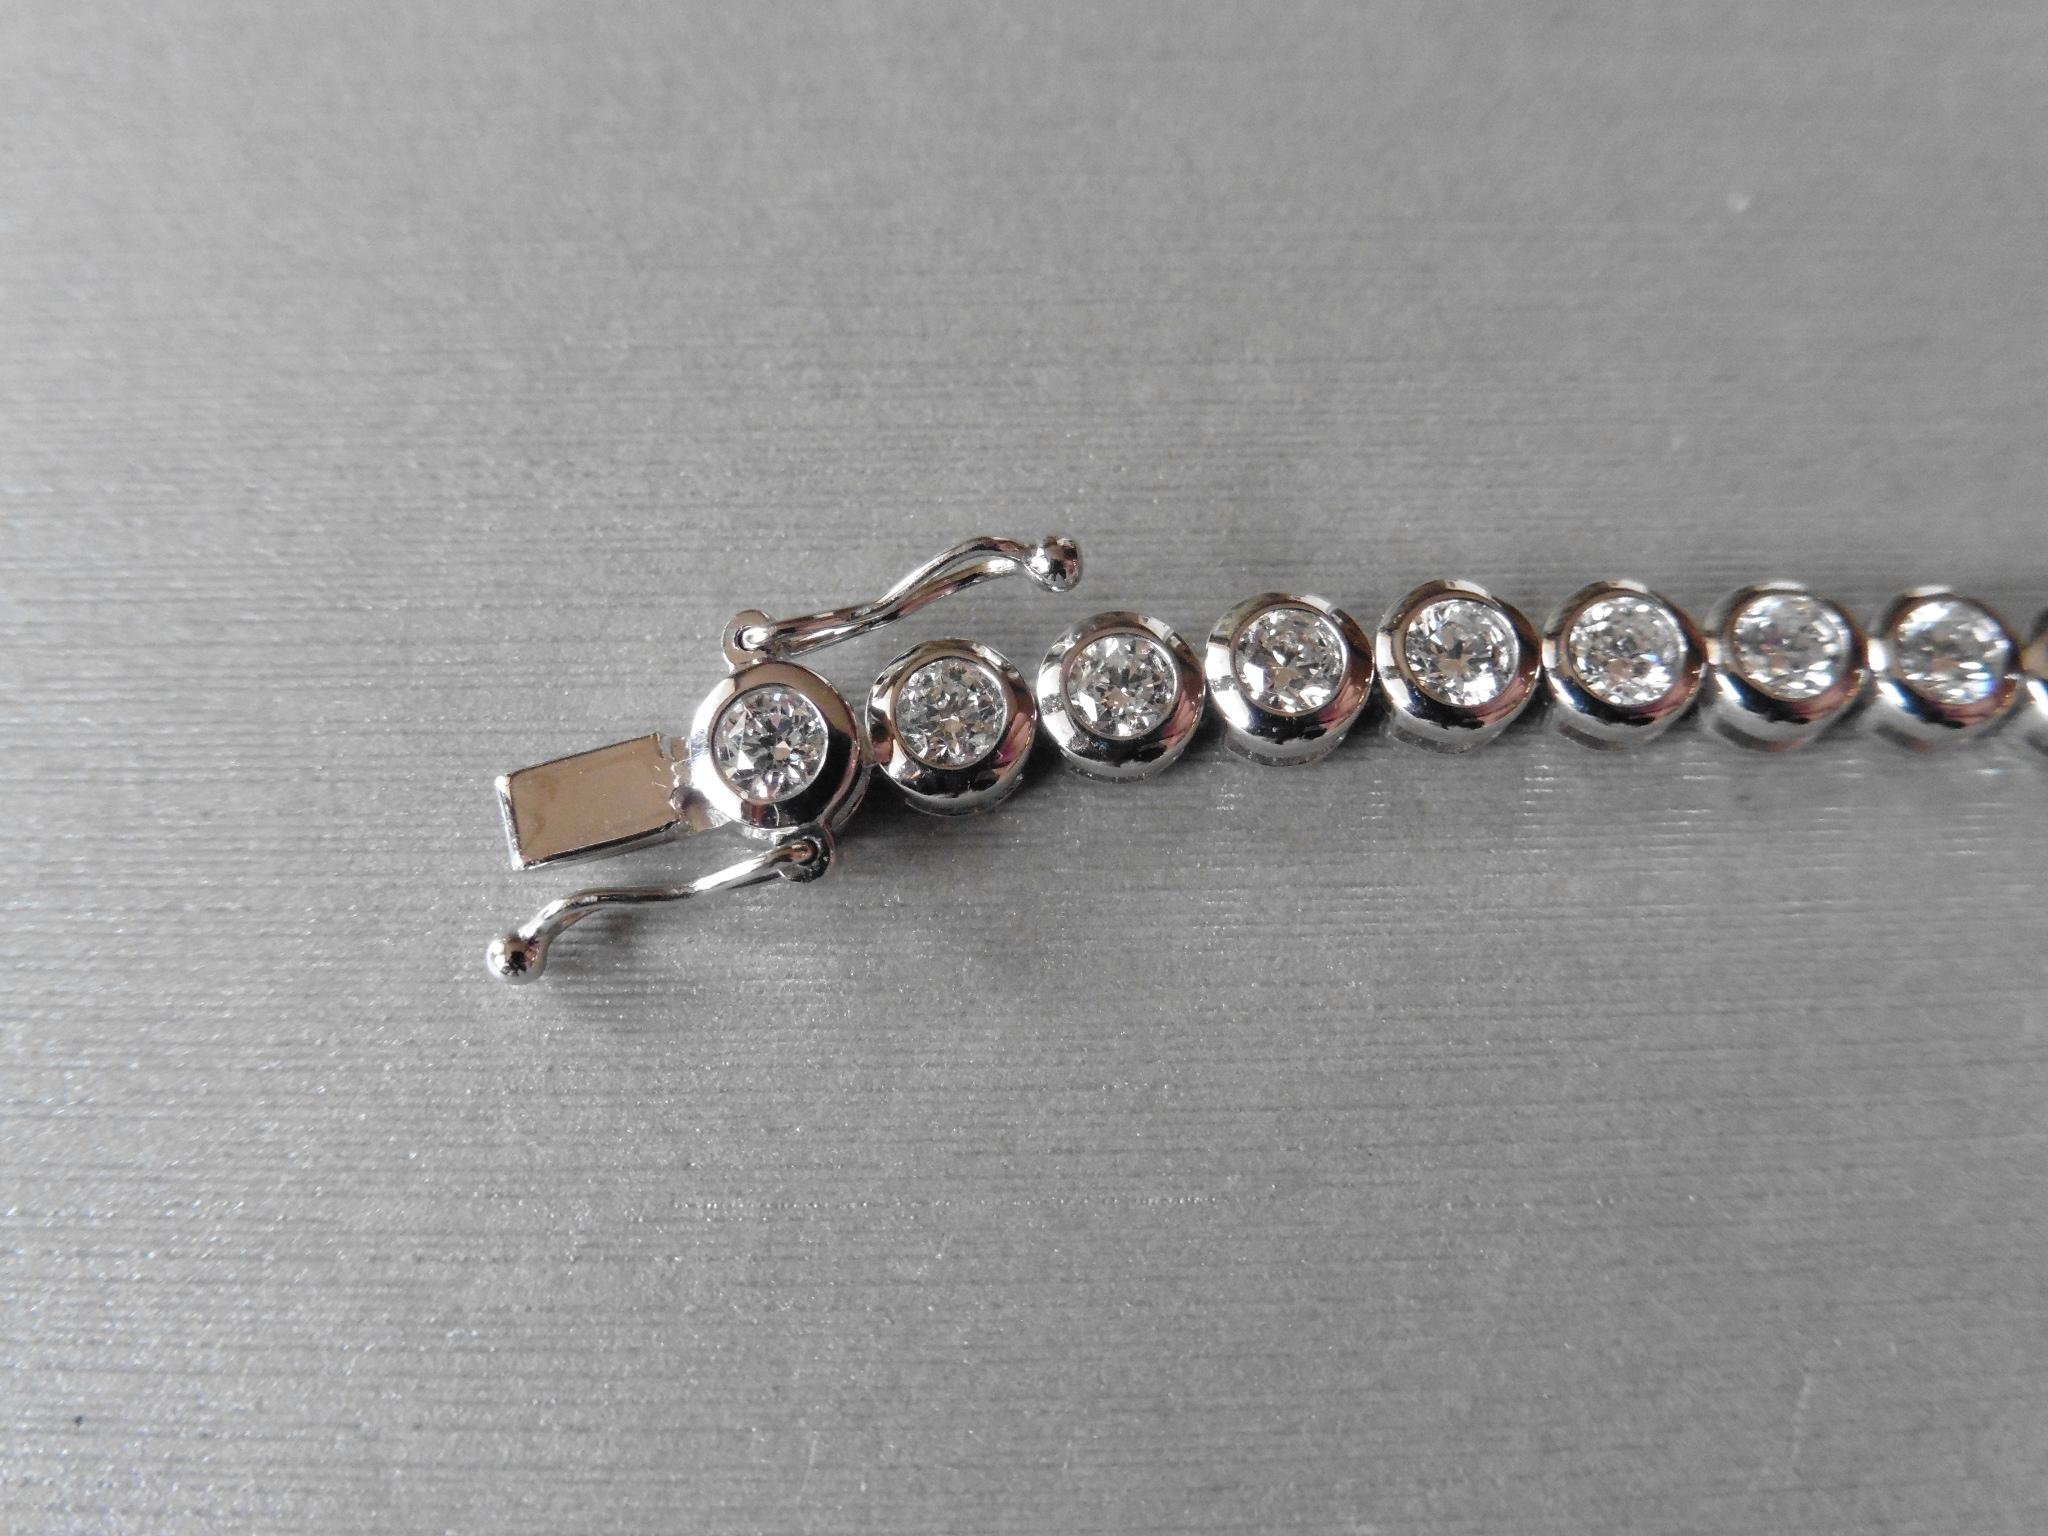 Brand new 18ct white gold diamond tennis style bracelet set with brilliant cut diamonds weighing 5ct - Image 3 of 4